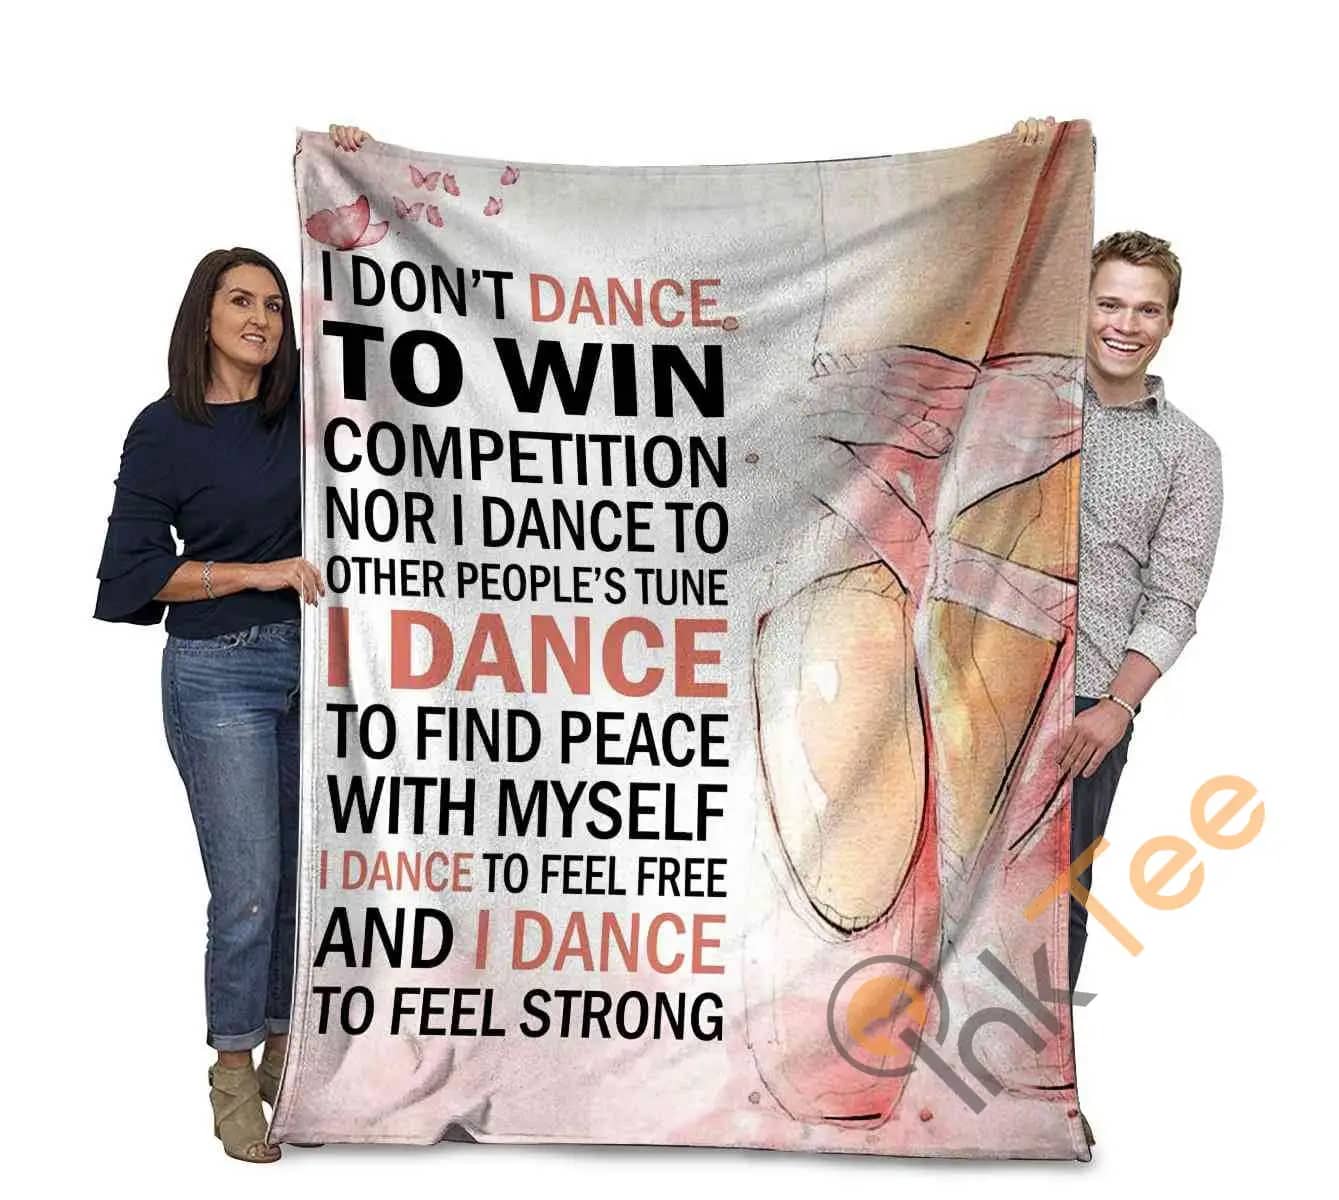 Ballet Dancer I Don't Dance To Win Competition I Dance To Find Peace With Myself Ultra Soft Cozy Plush Fleece Blanket